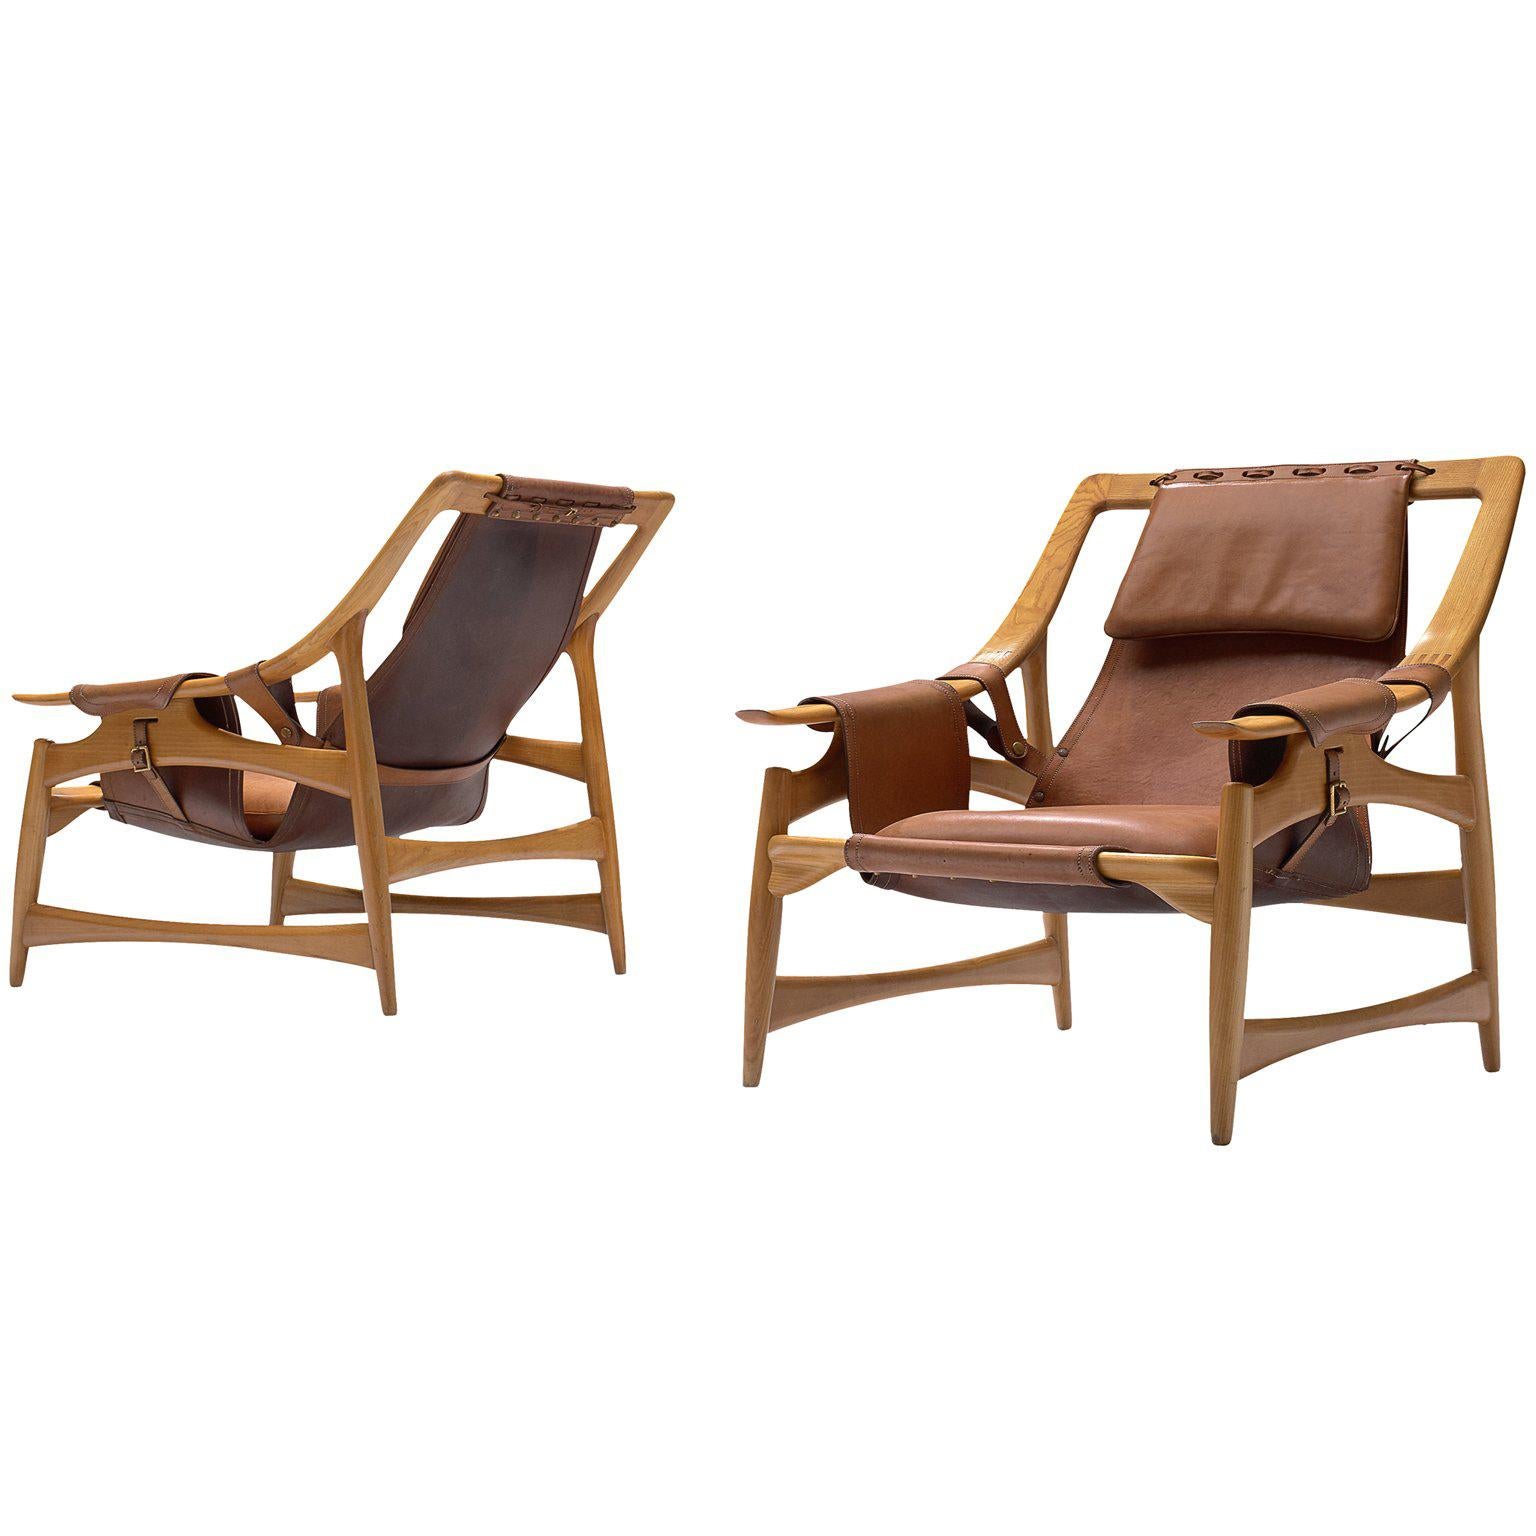 W. Andersag Pair of Lounge Chairs in Teak and Brown Leather